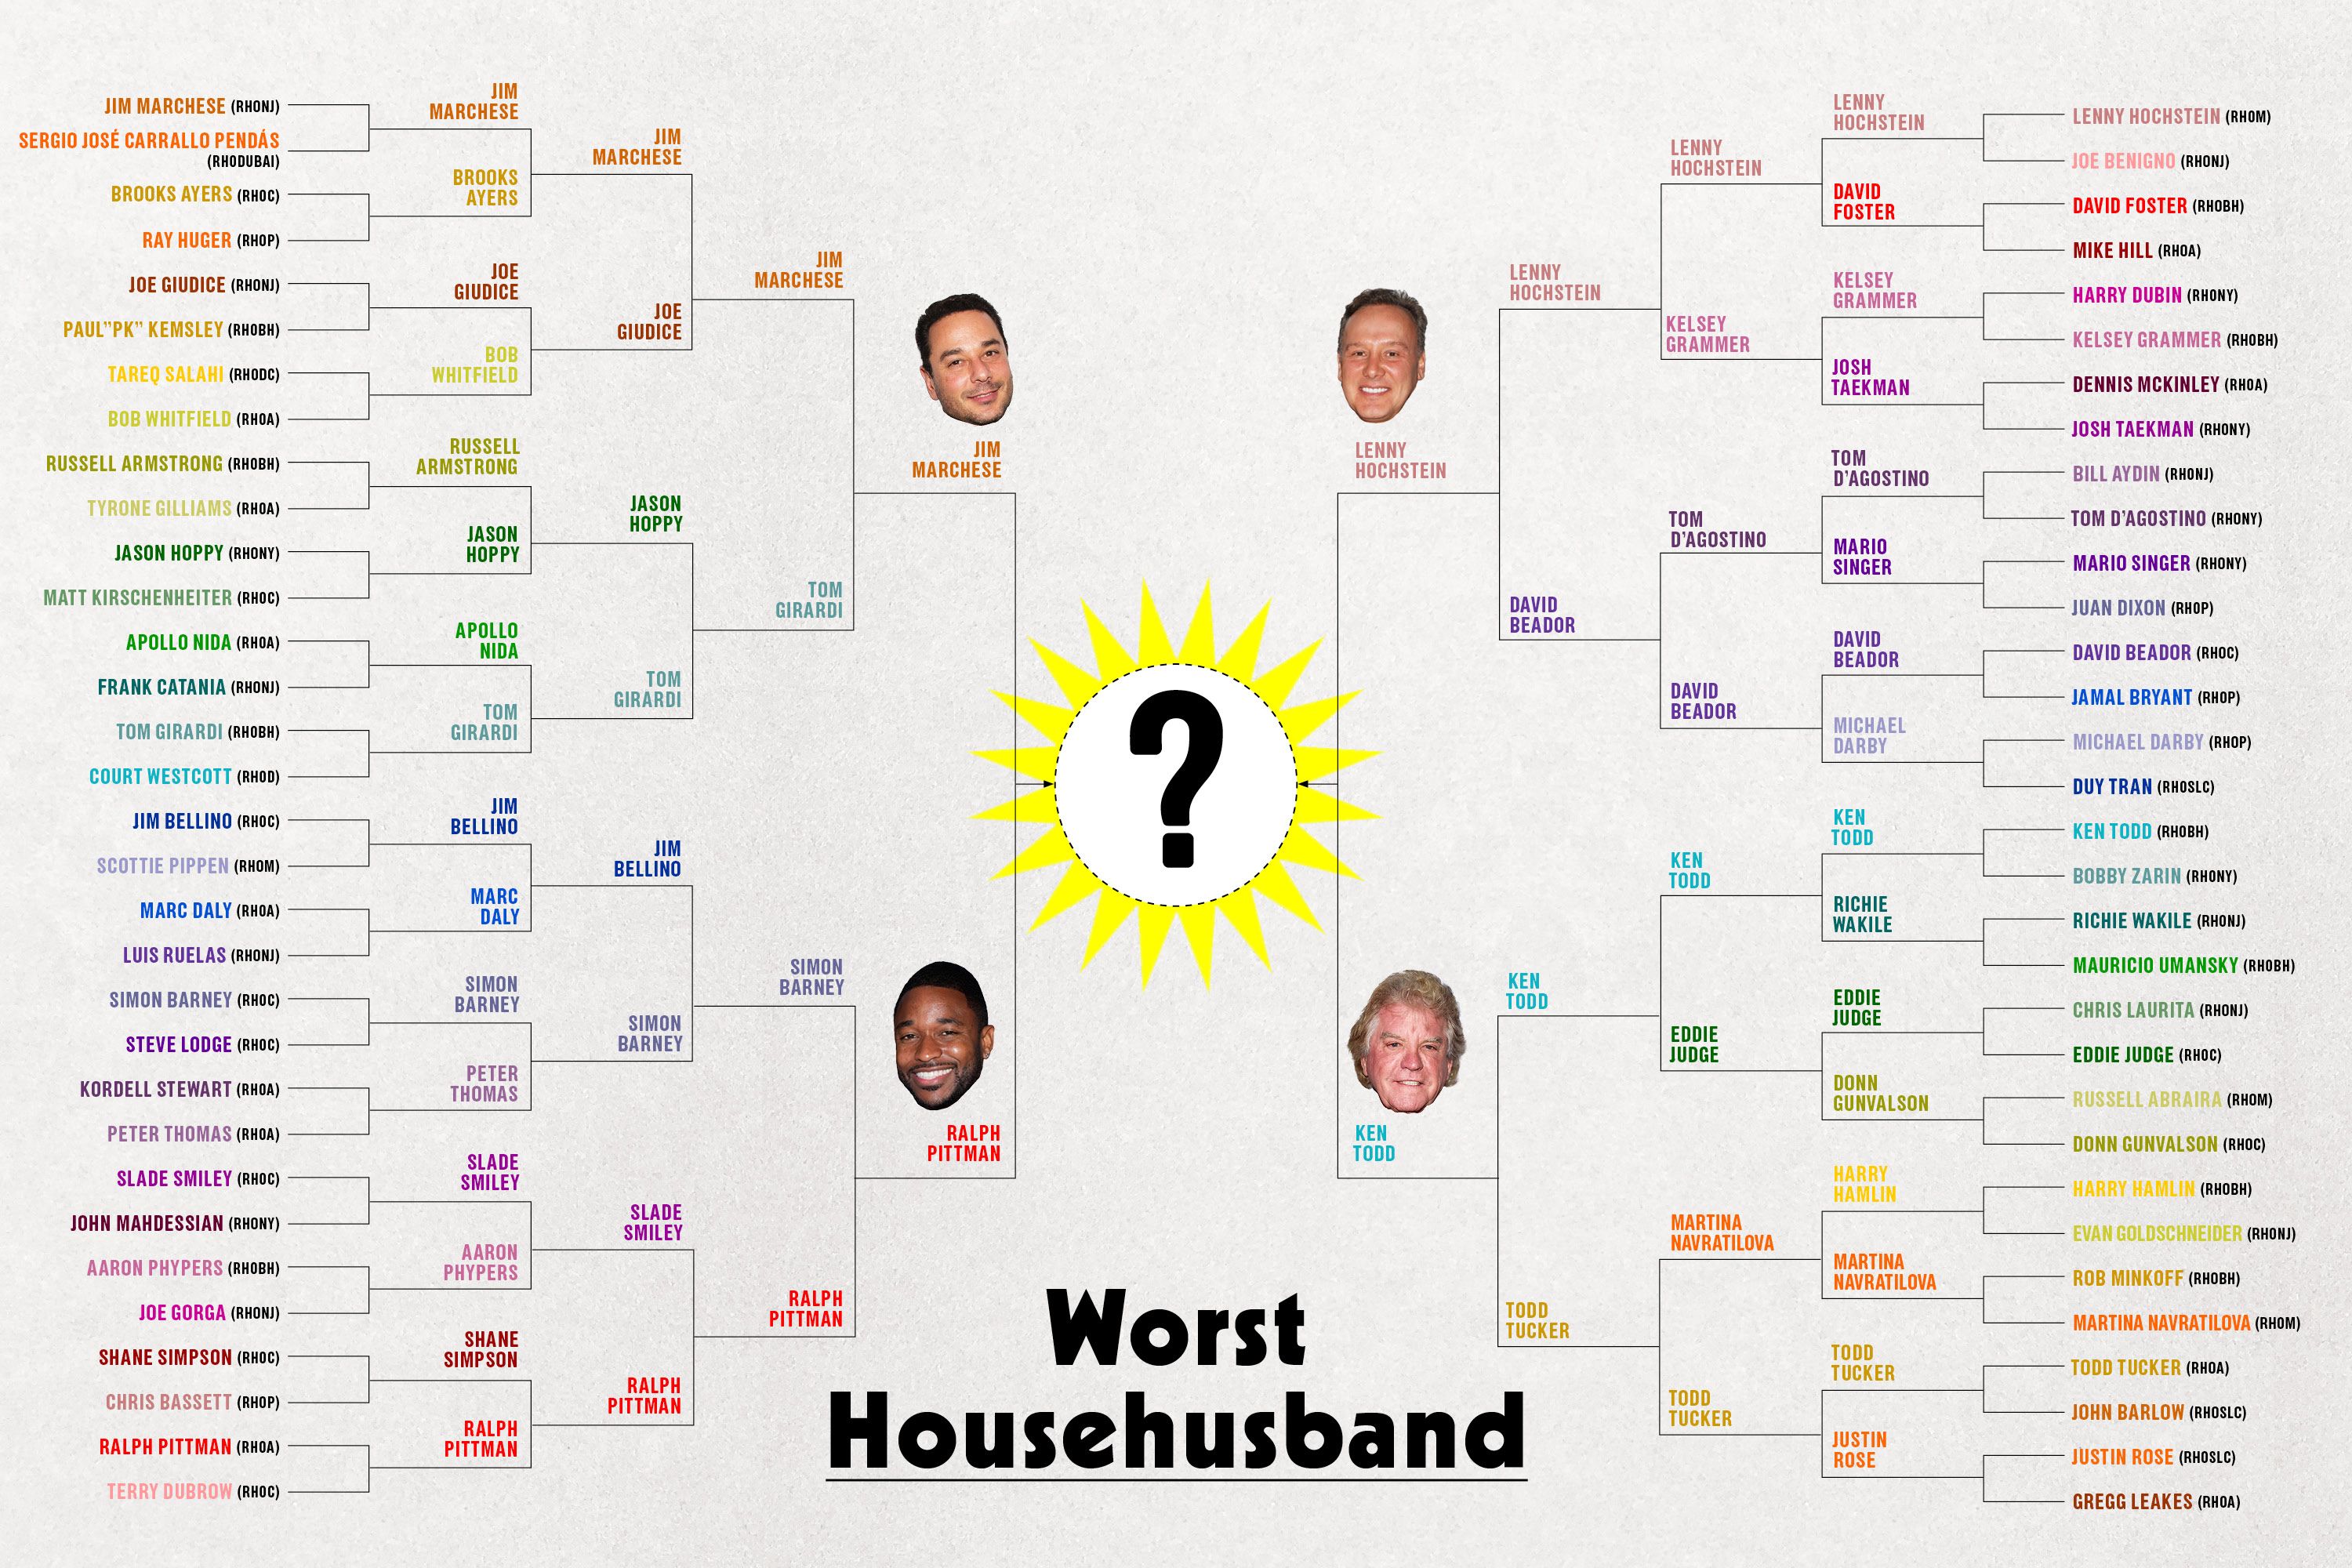 Housewives Institute Bulletin The Worst Househusband Ever picture pic image